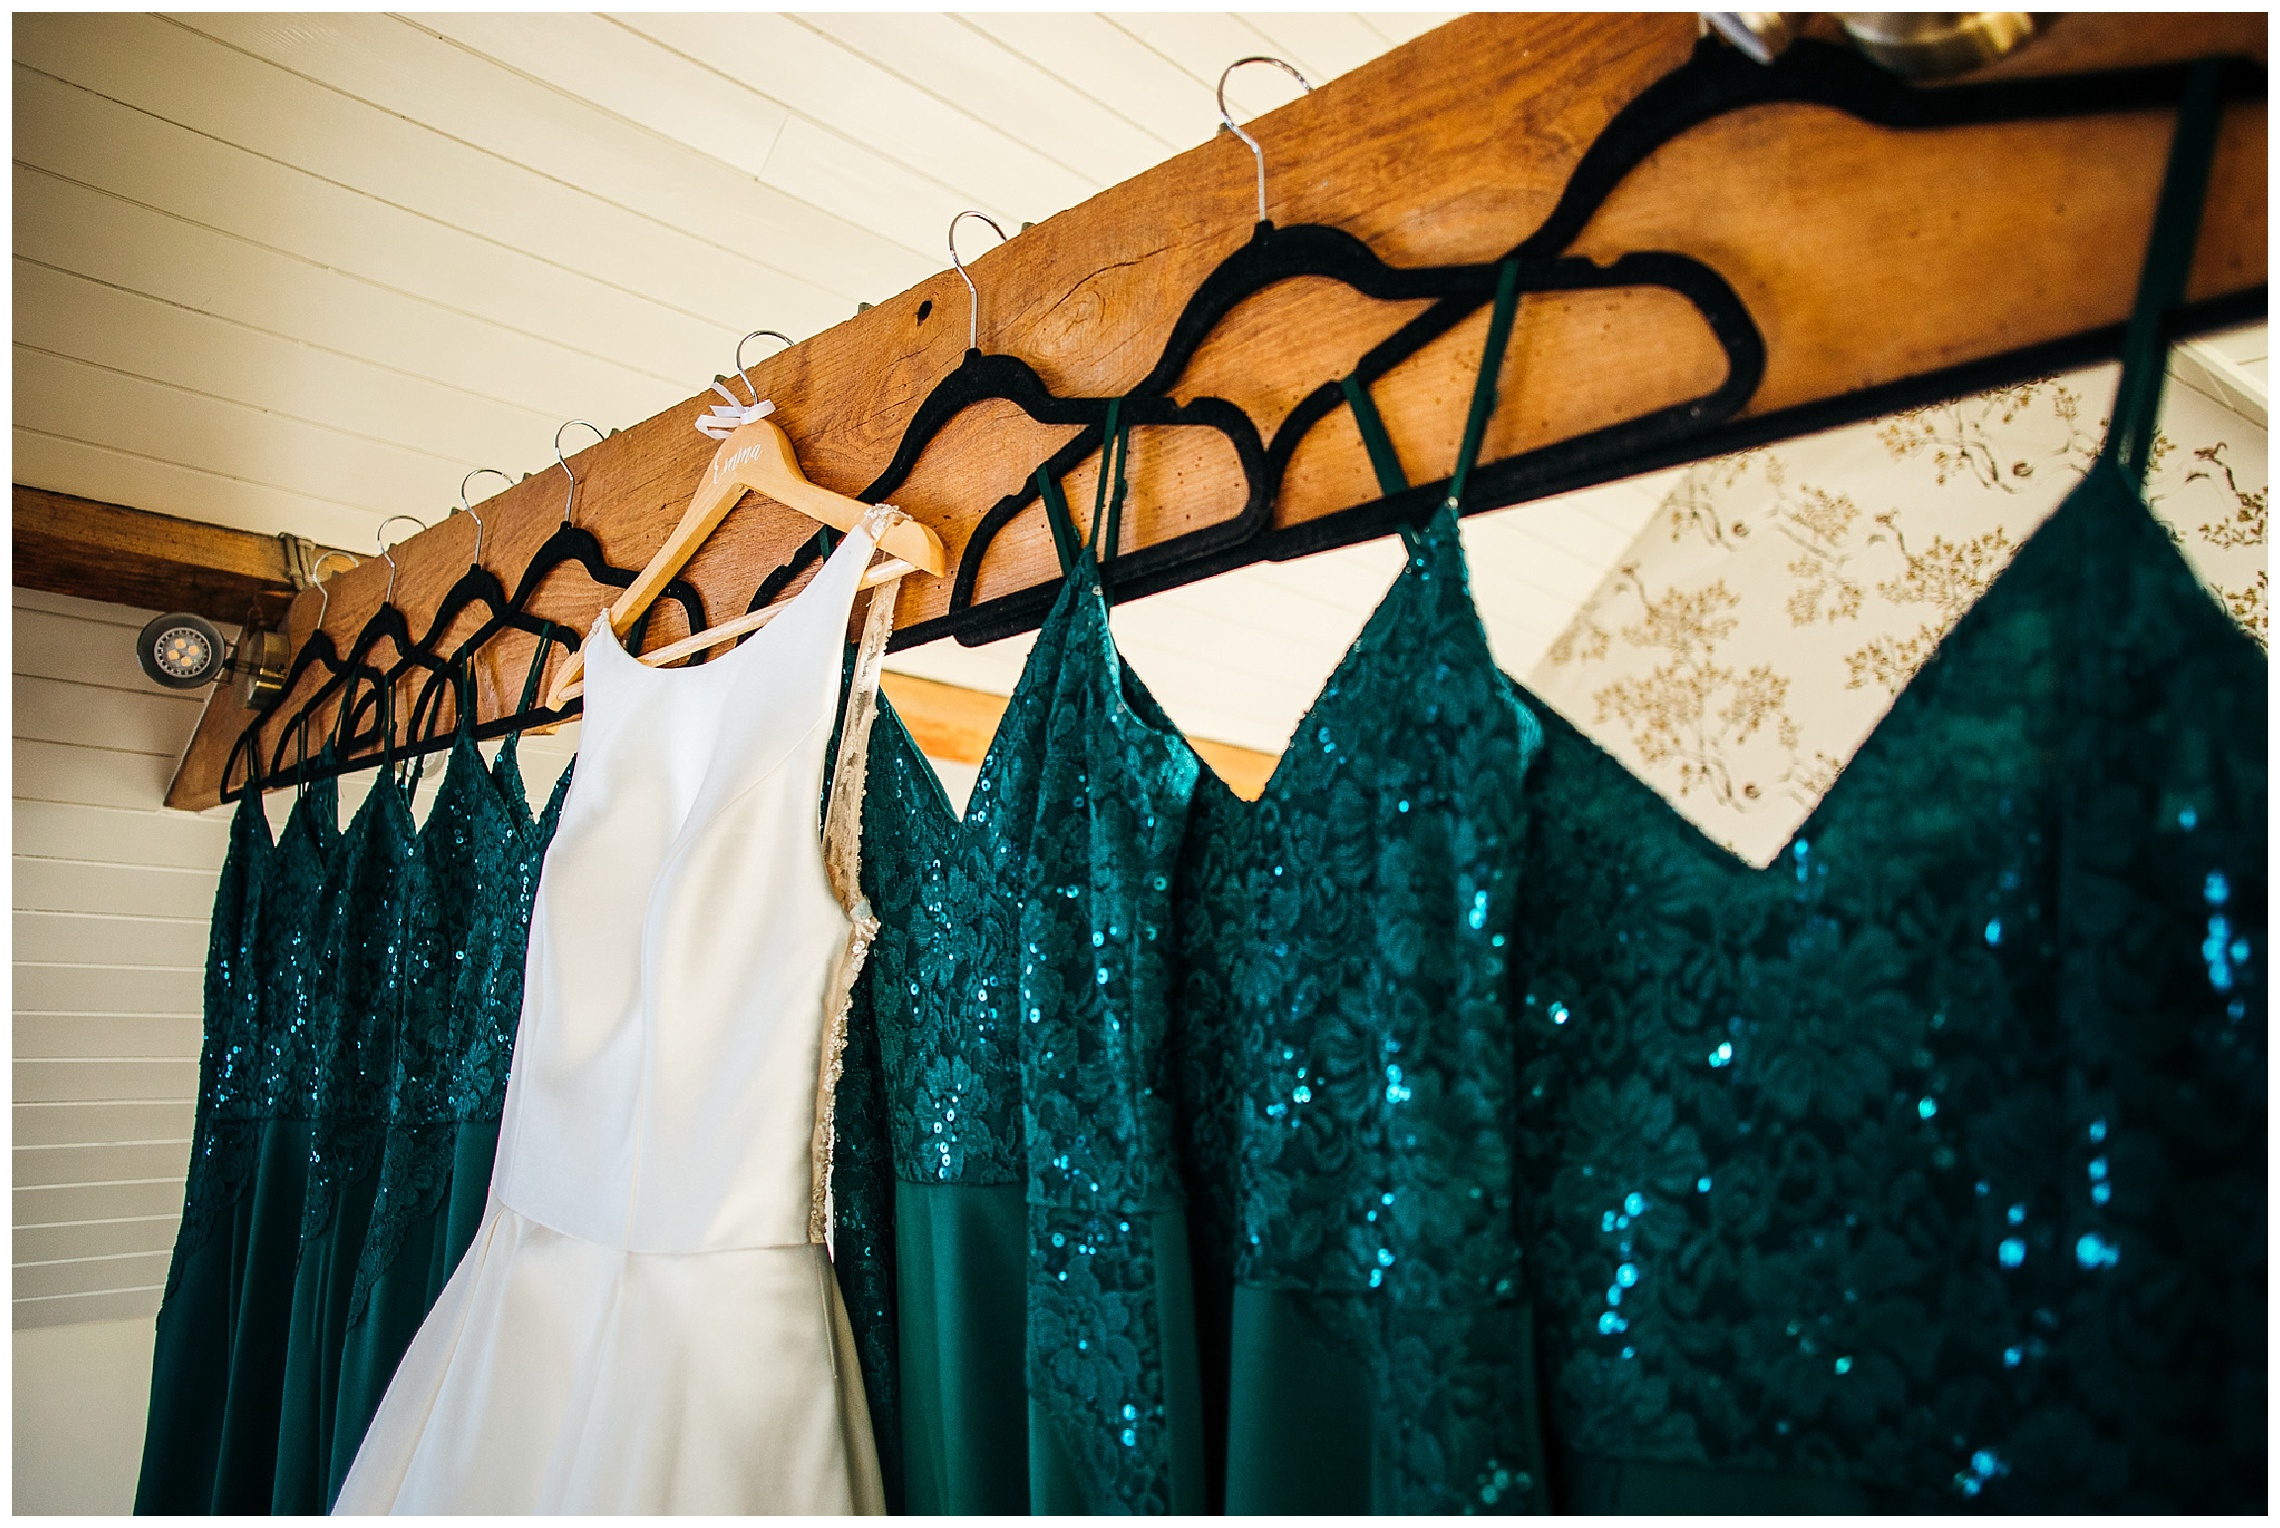 green sparkly bridesmaid dresses and white wedding dress hanging from beam